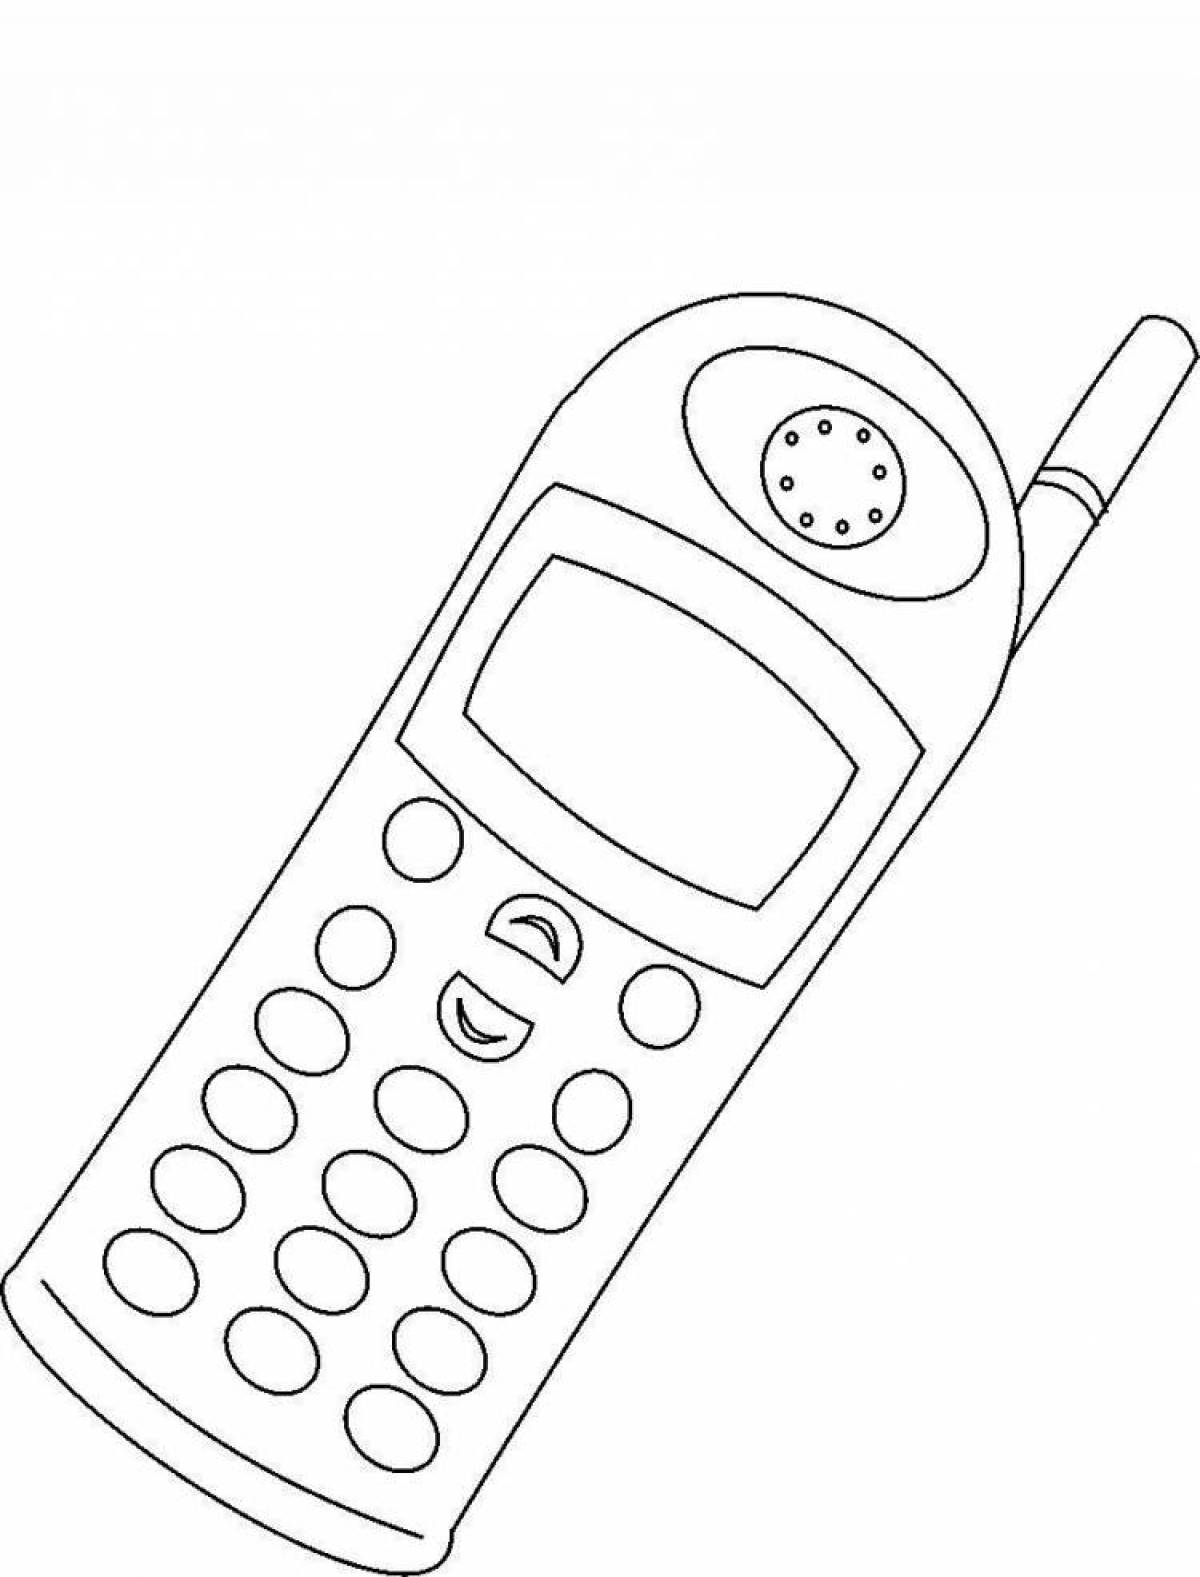 Adorable phone coloring book for kids